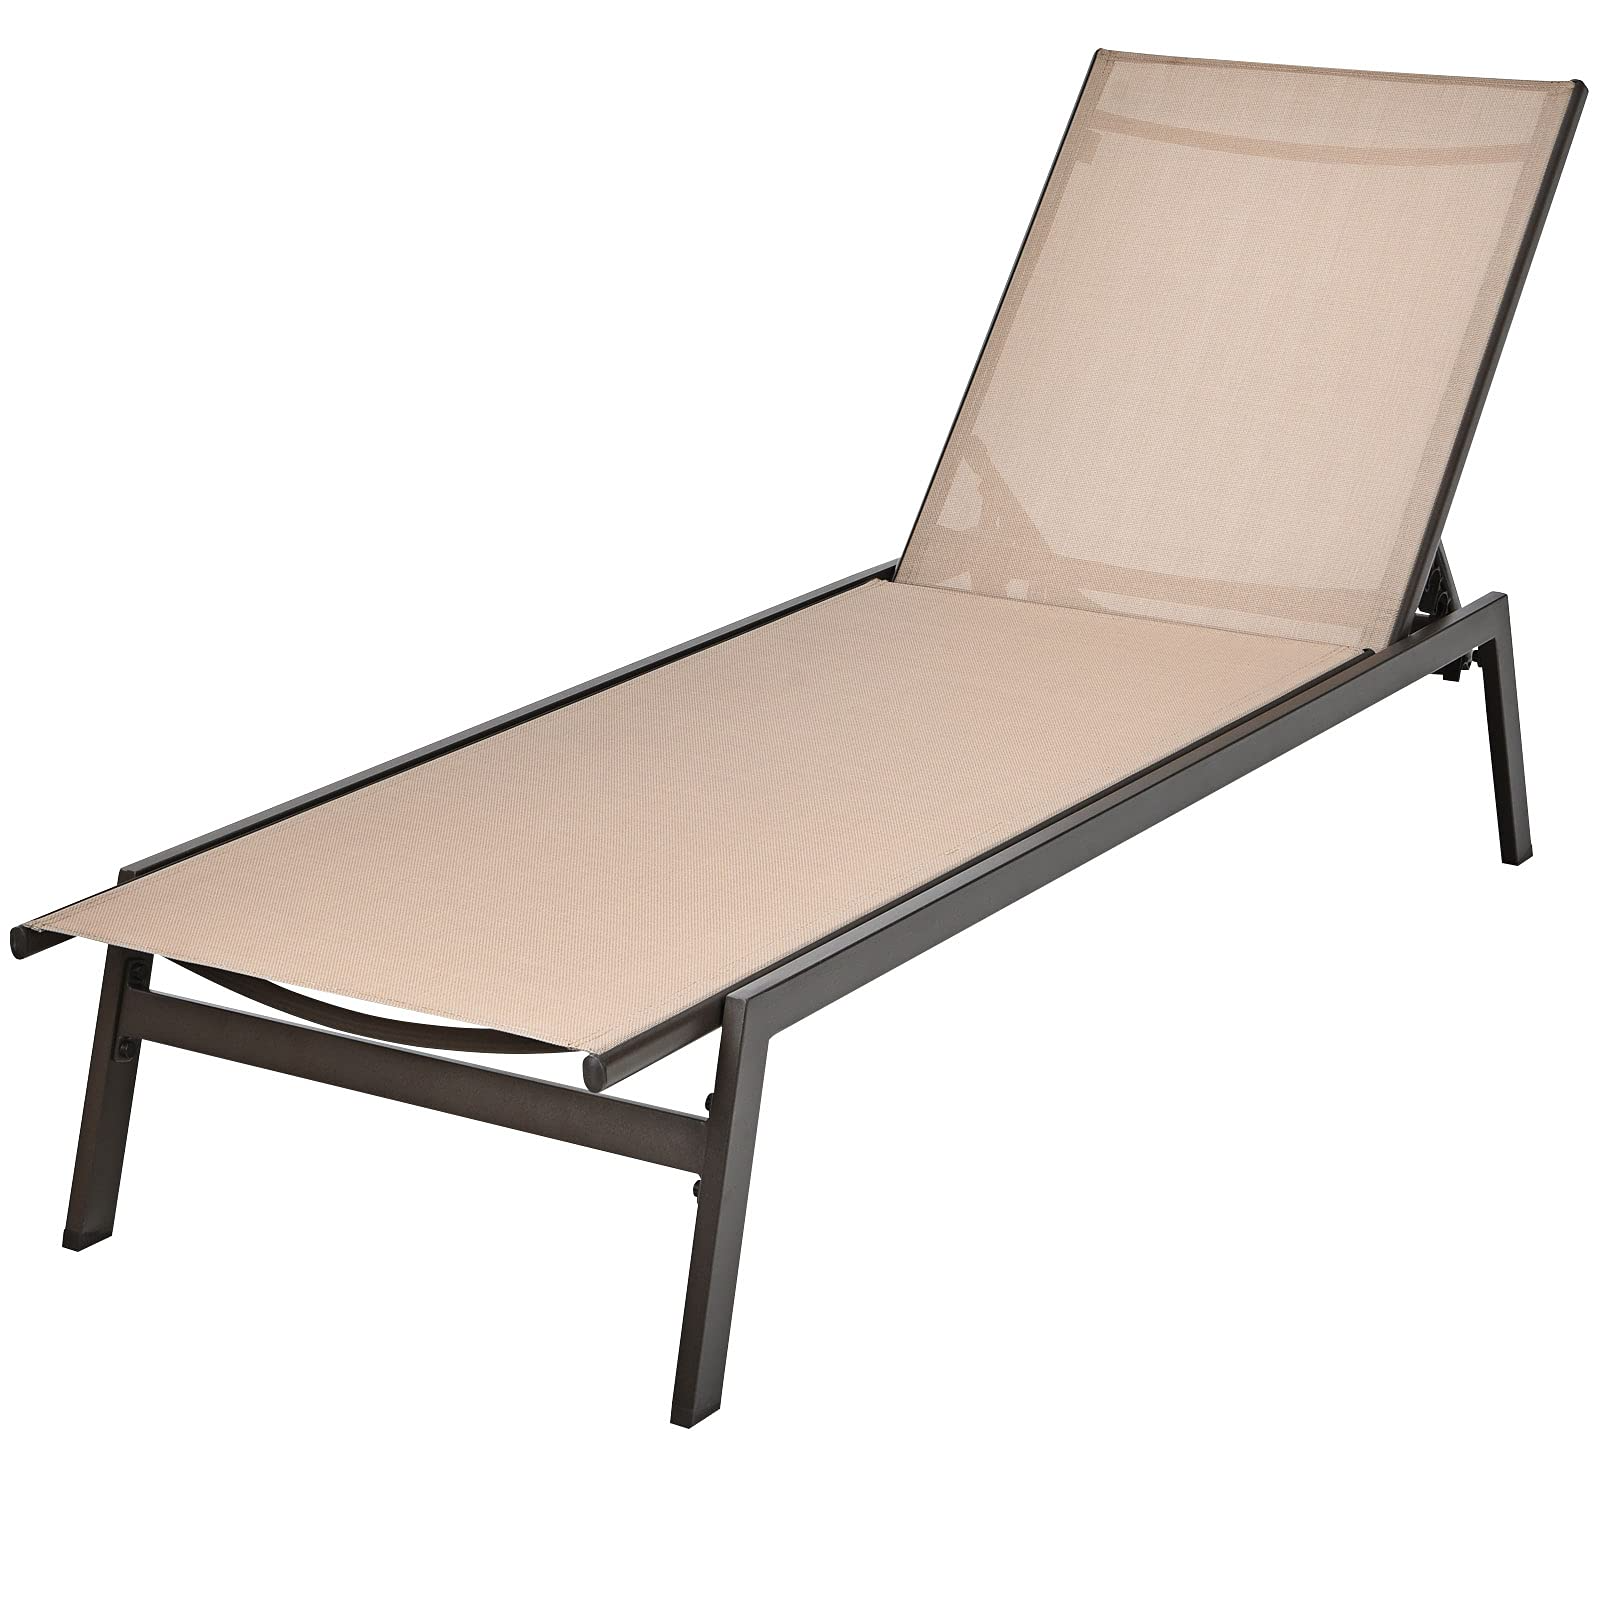 Giantex Chaise Lounge Chair Patio Chaise Lounger with 6-Postion Adjustable Backrest and Breathable Fabric